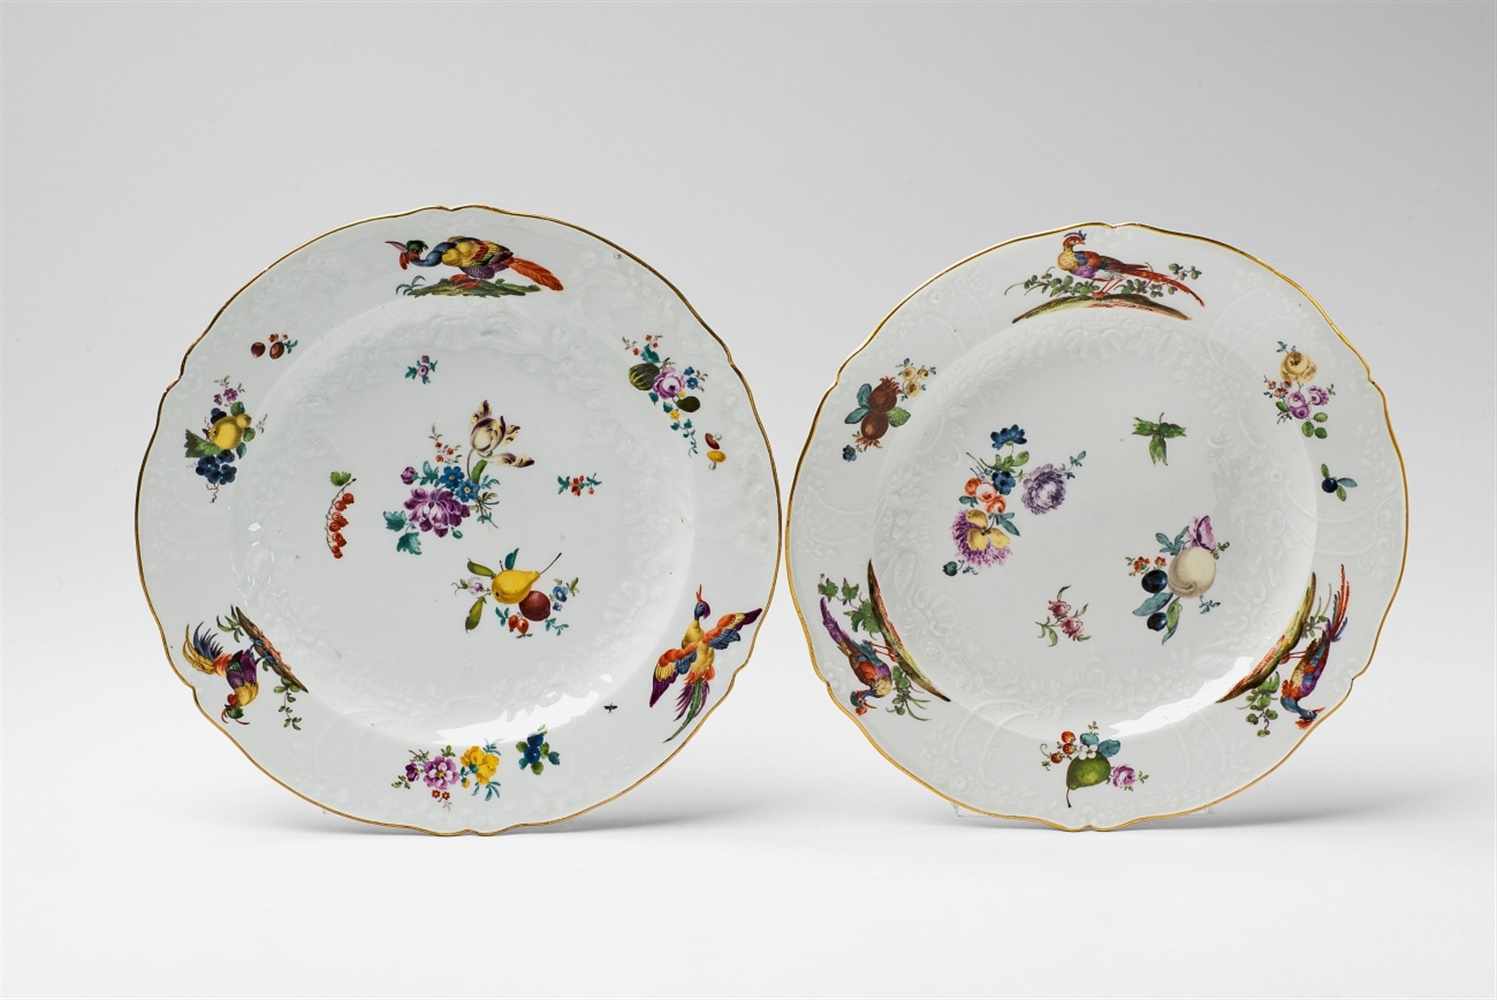 A pair of Meissen porcelain plates from a dinner service made for Frederick II With Marseille-relief